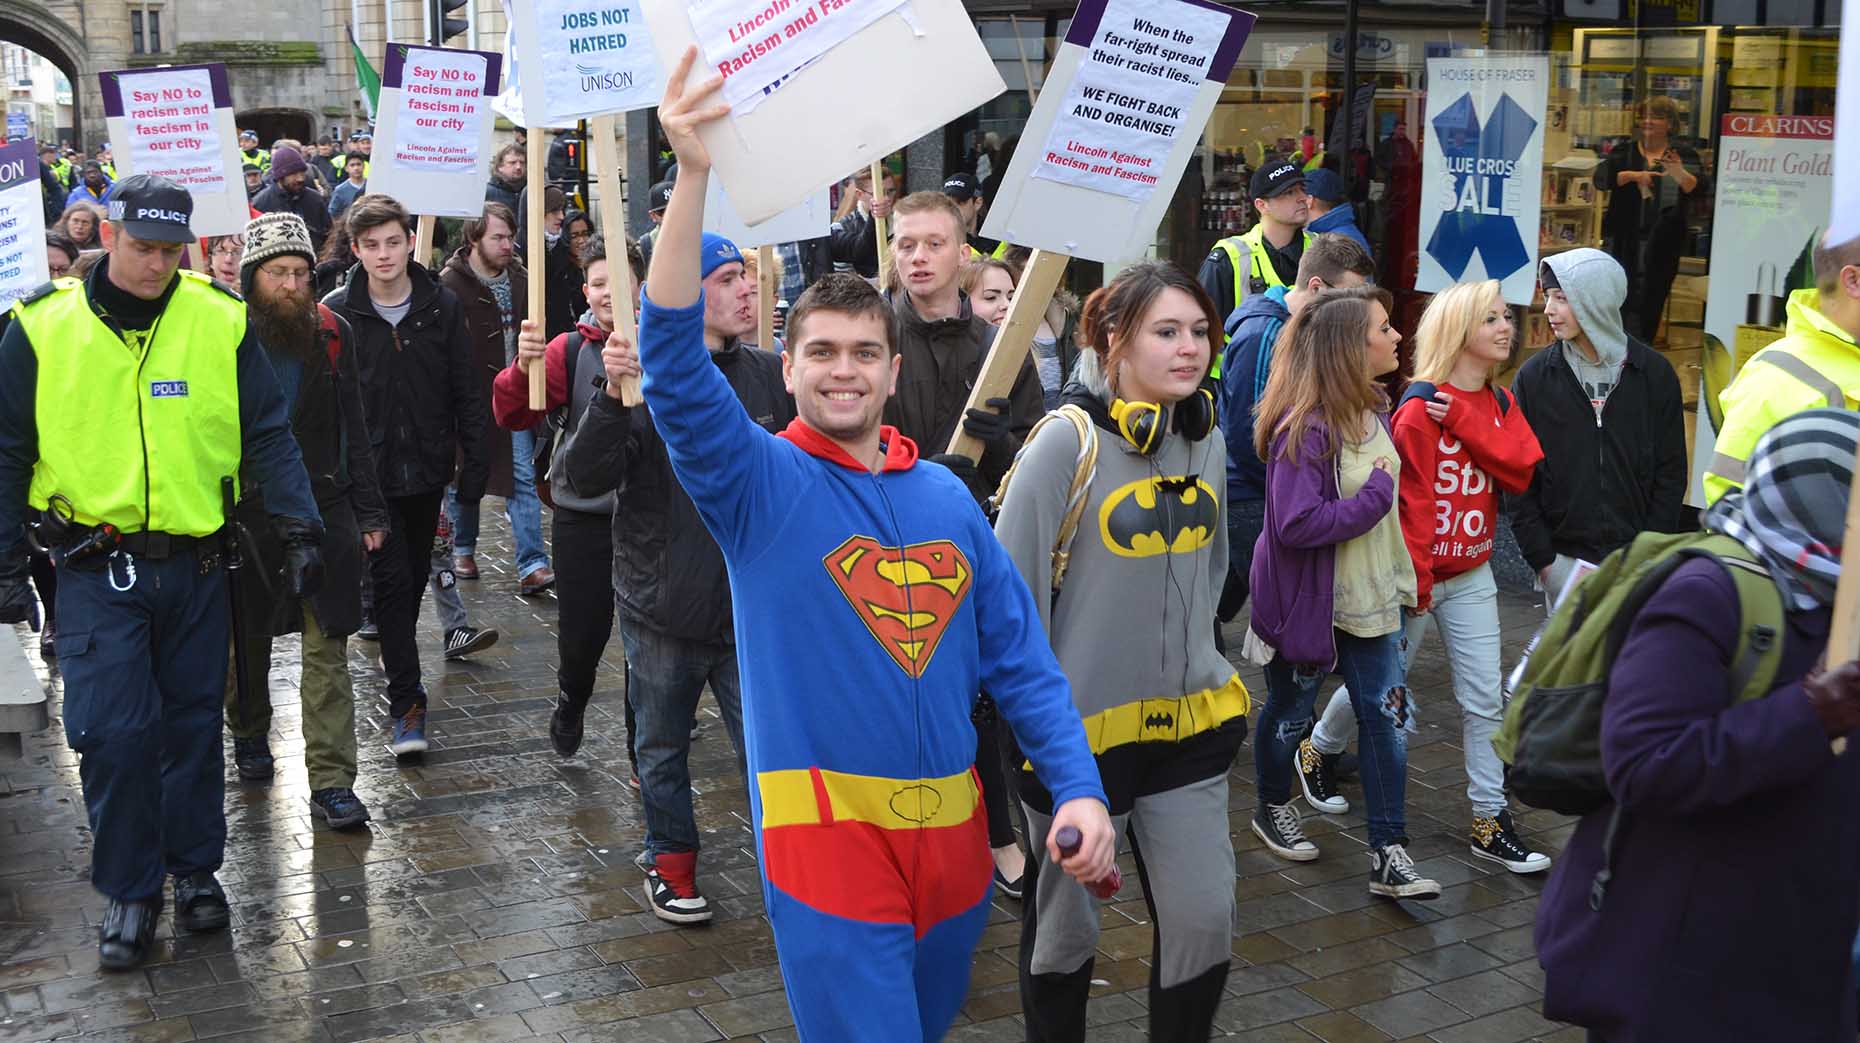 Supporters at the anti-racism demo in Lincoln. Photo: Emily Norton